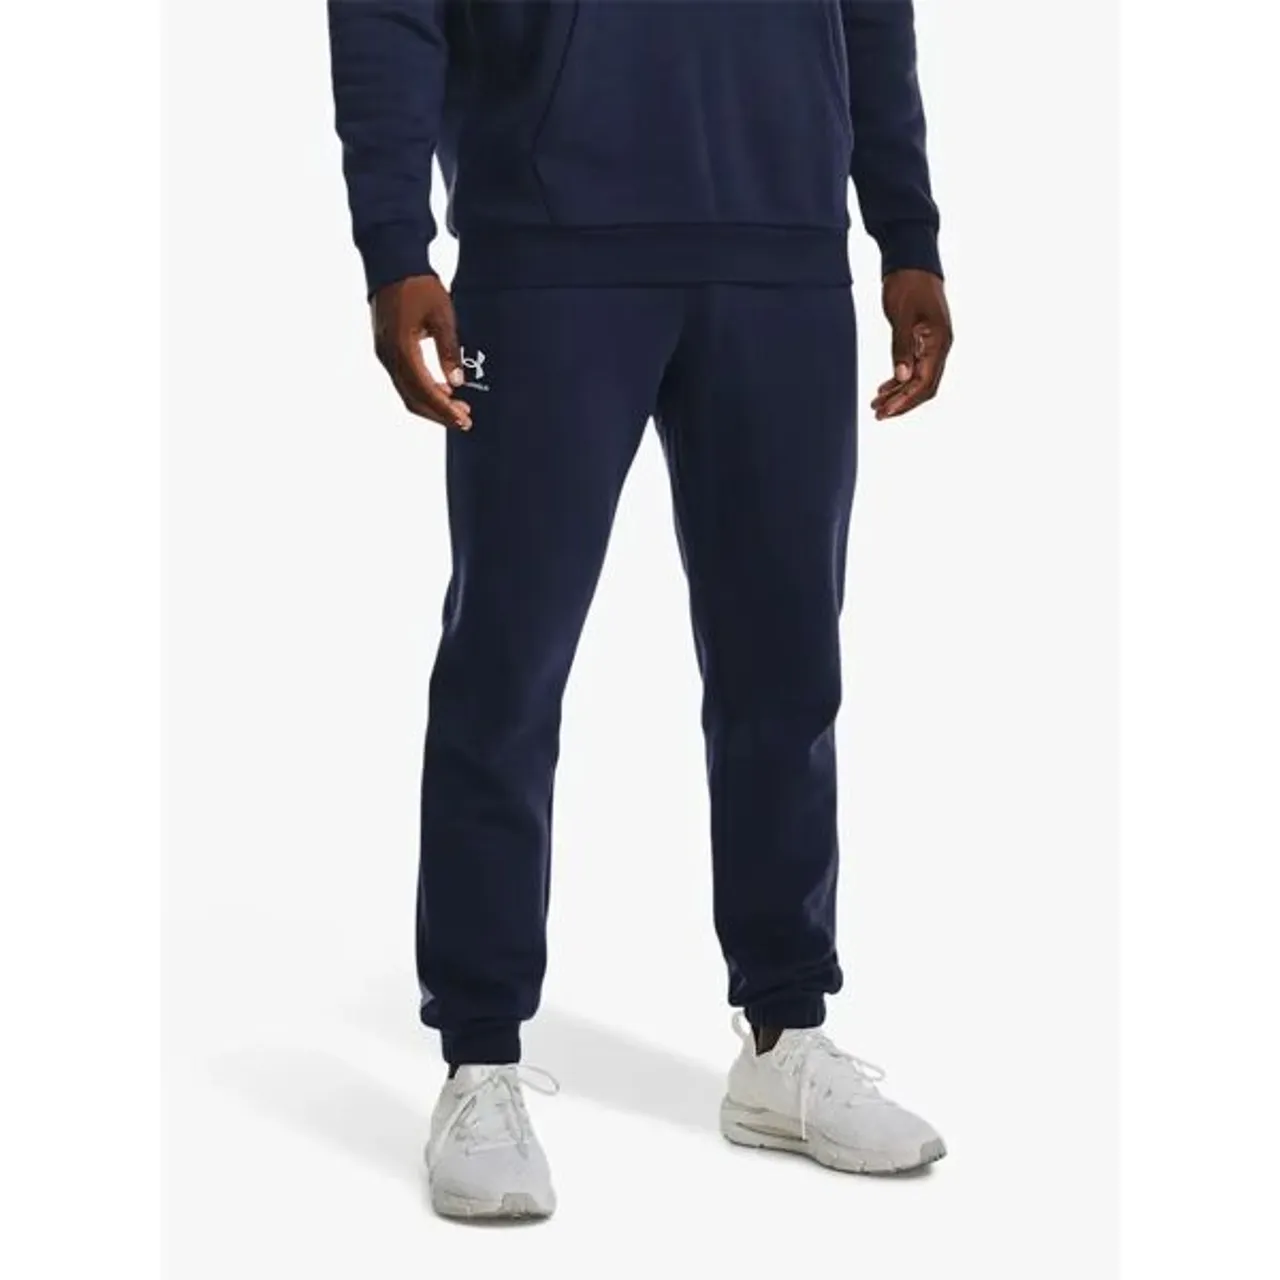 Under Armour Essential Fleece Joggers - Midnight Navy - Male